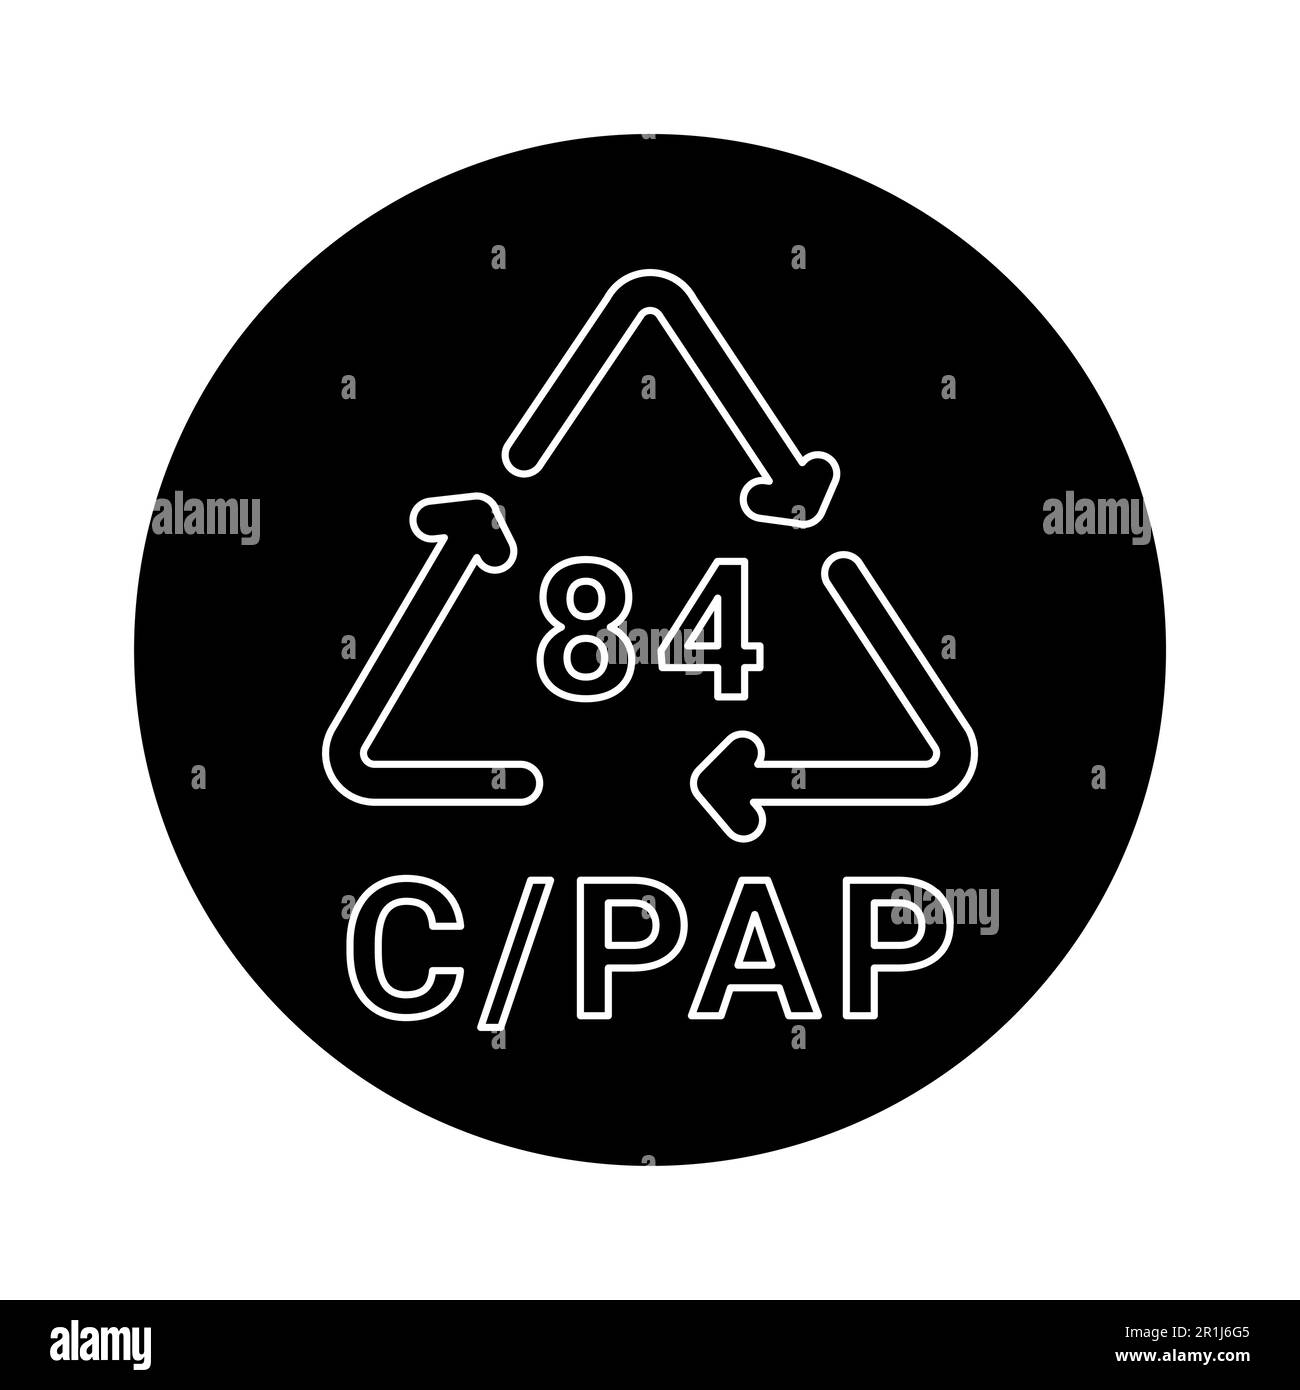 Recycling c pap Stock Vector Images - Alamy